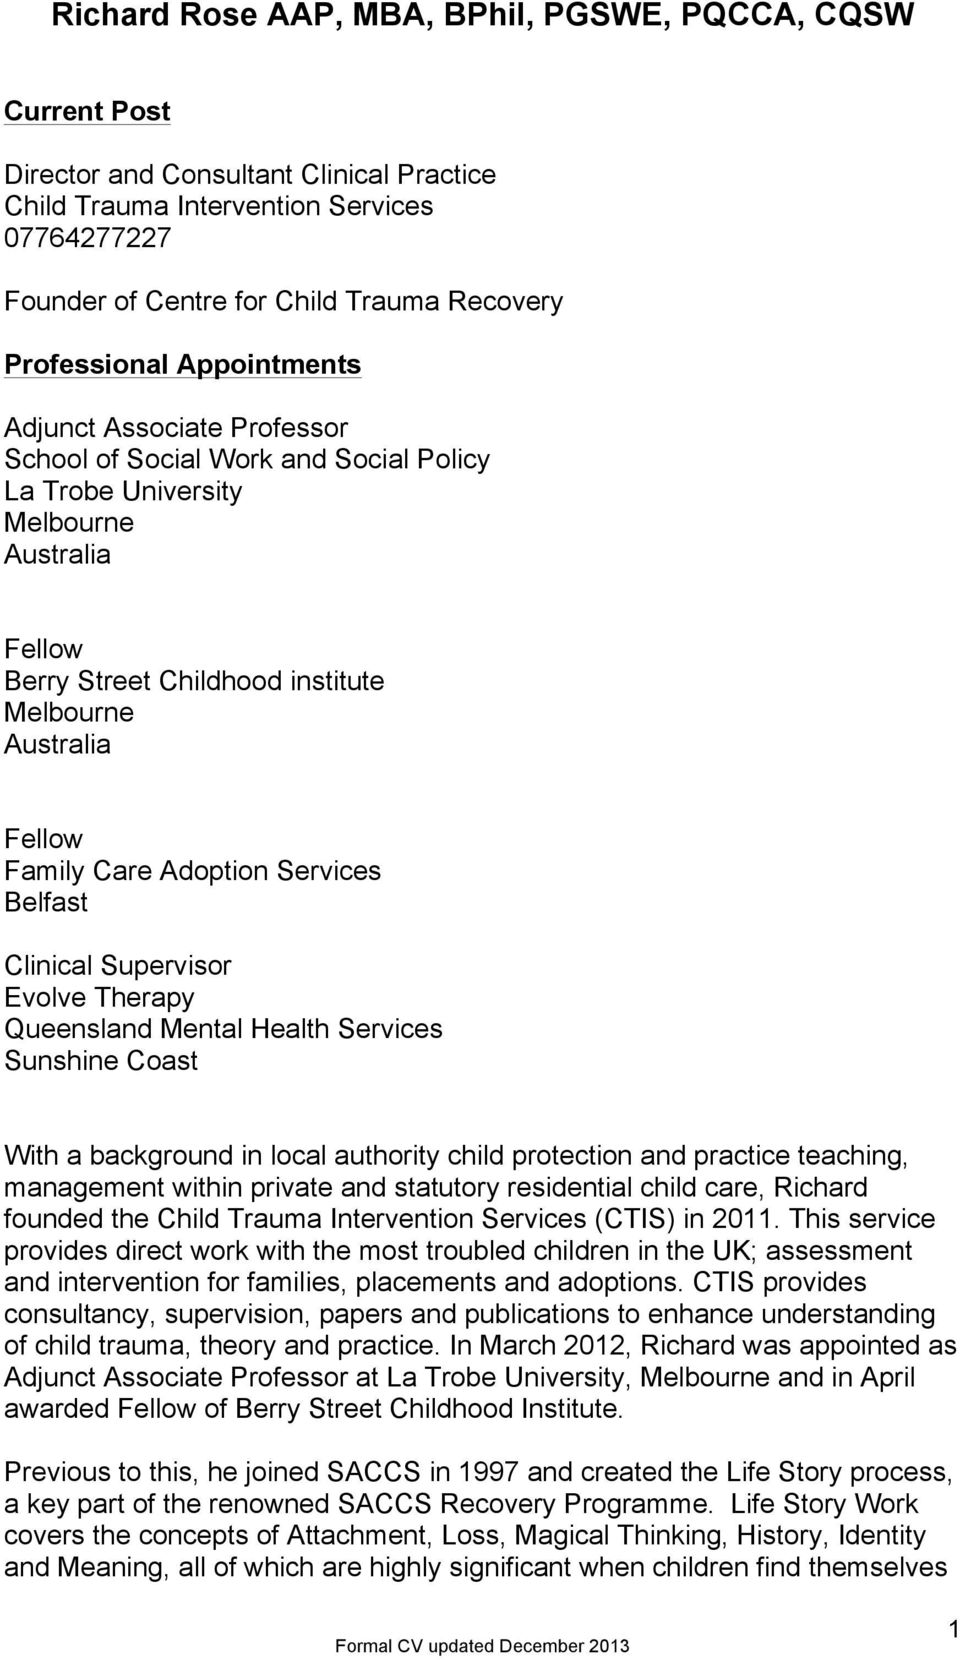 Clinical Supervisor Evolve Therapy Queensland Mental Health Services Sunshine Coast With a background in local authority child protection and practice teaching, management within private and